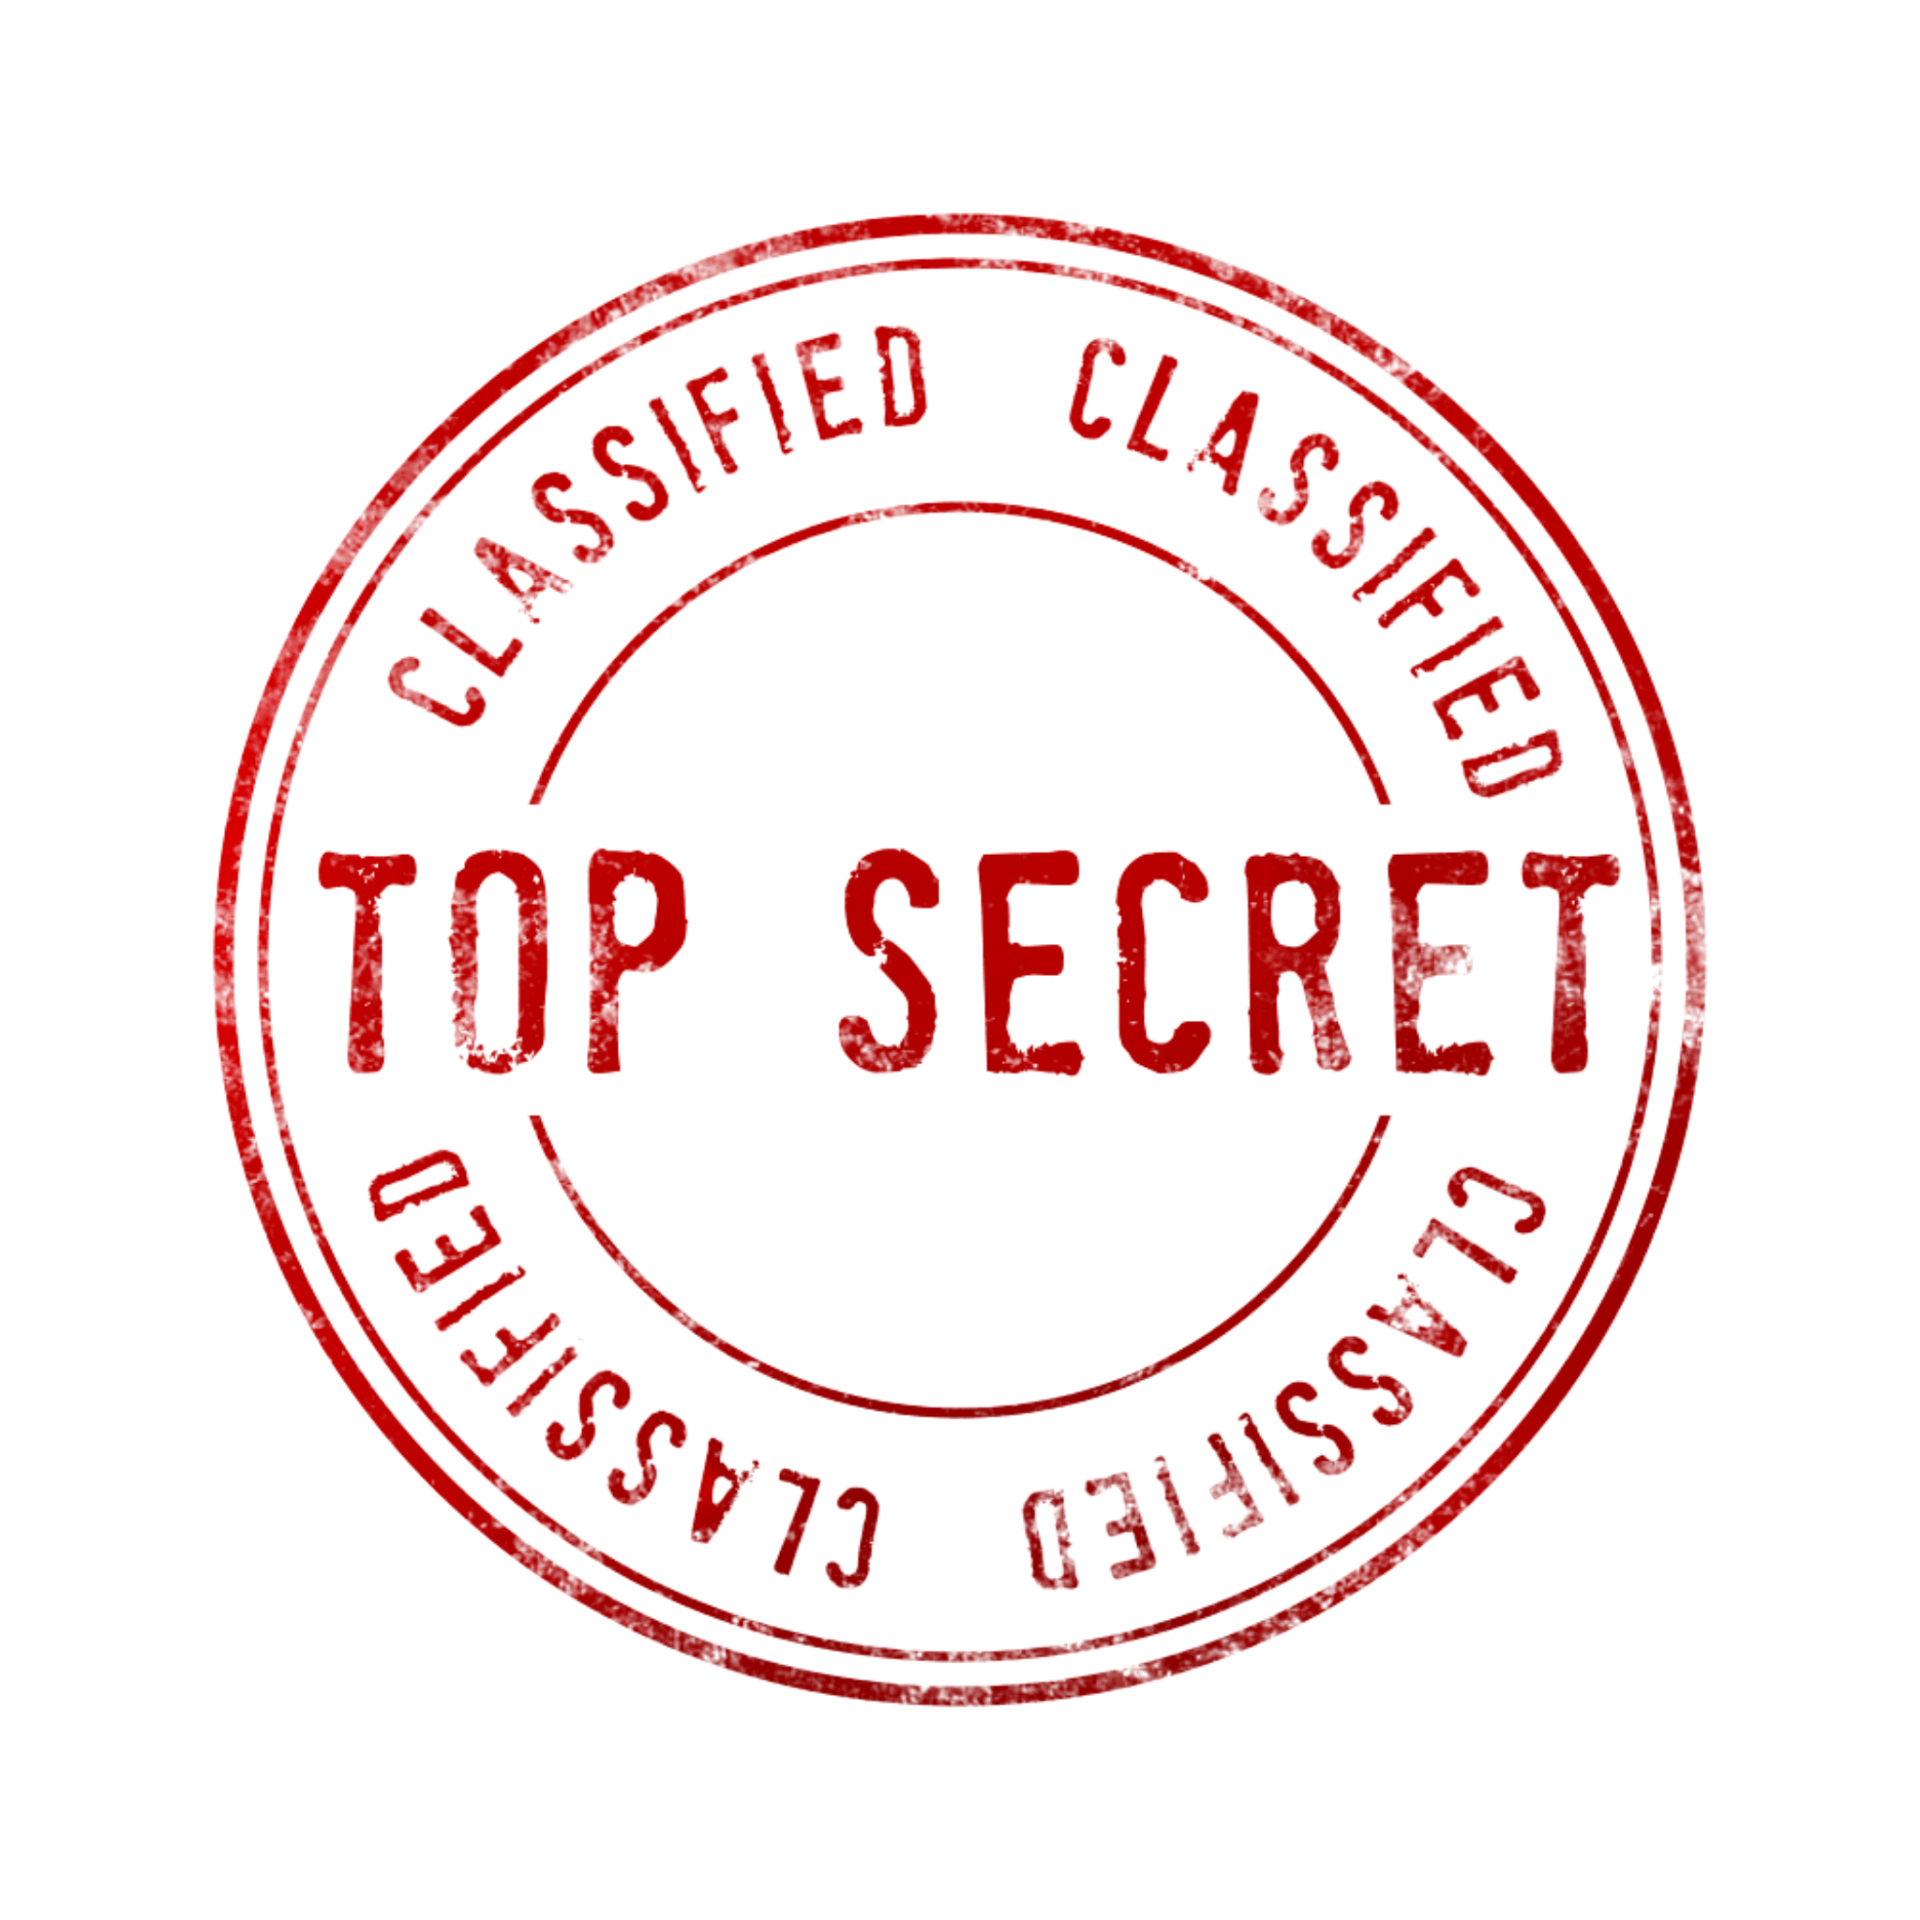 A red stamp that says classified top secret